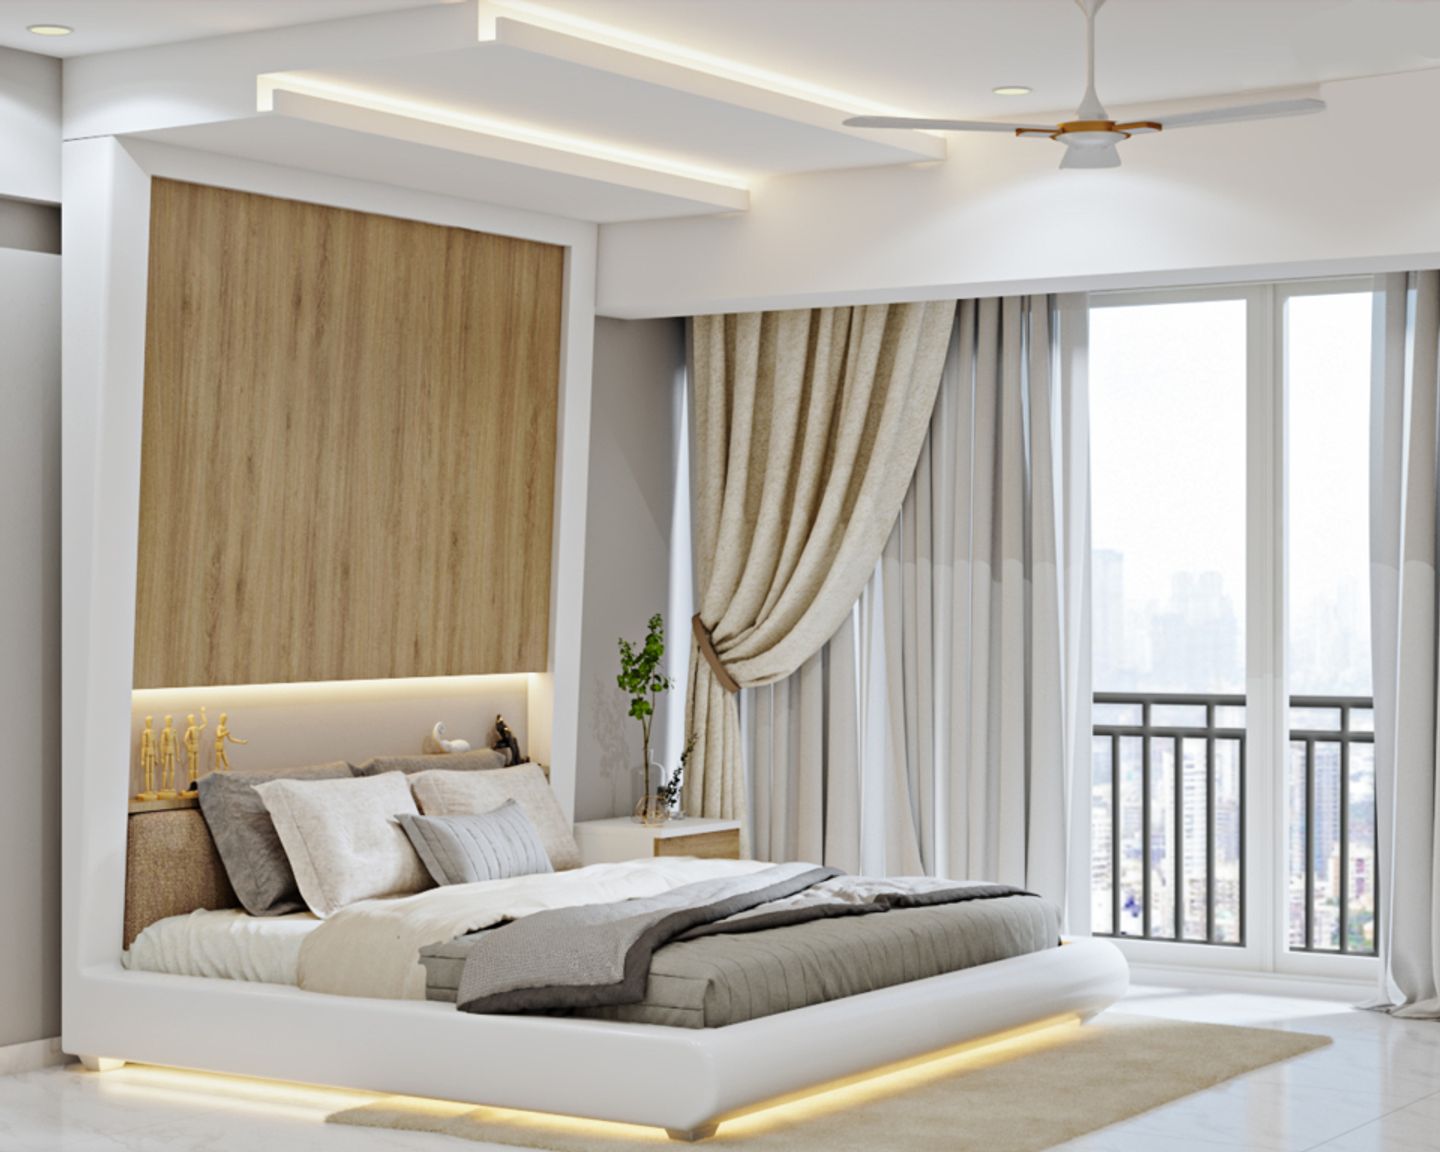 Modern Bedroom Wall Design With Wooden Panel